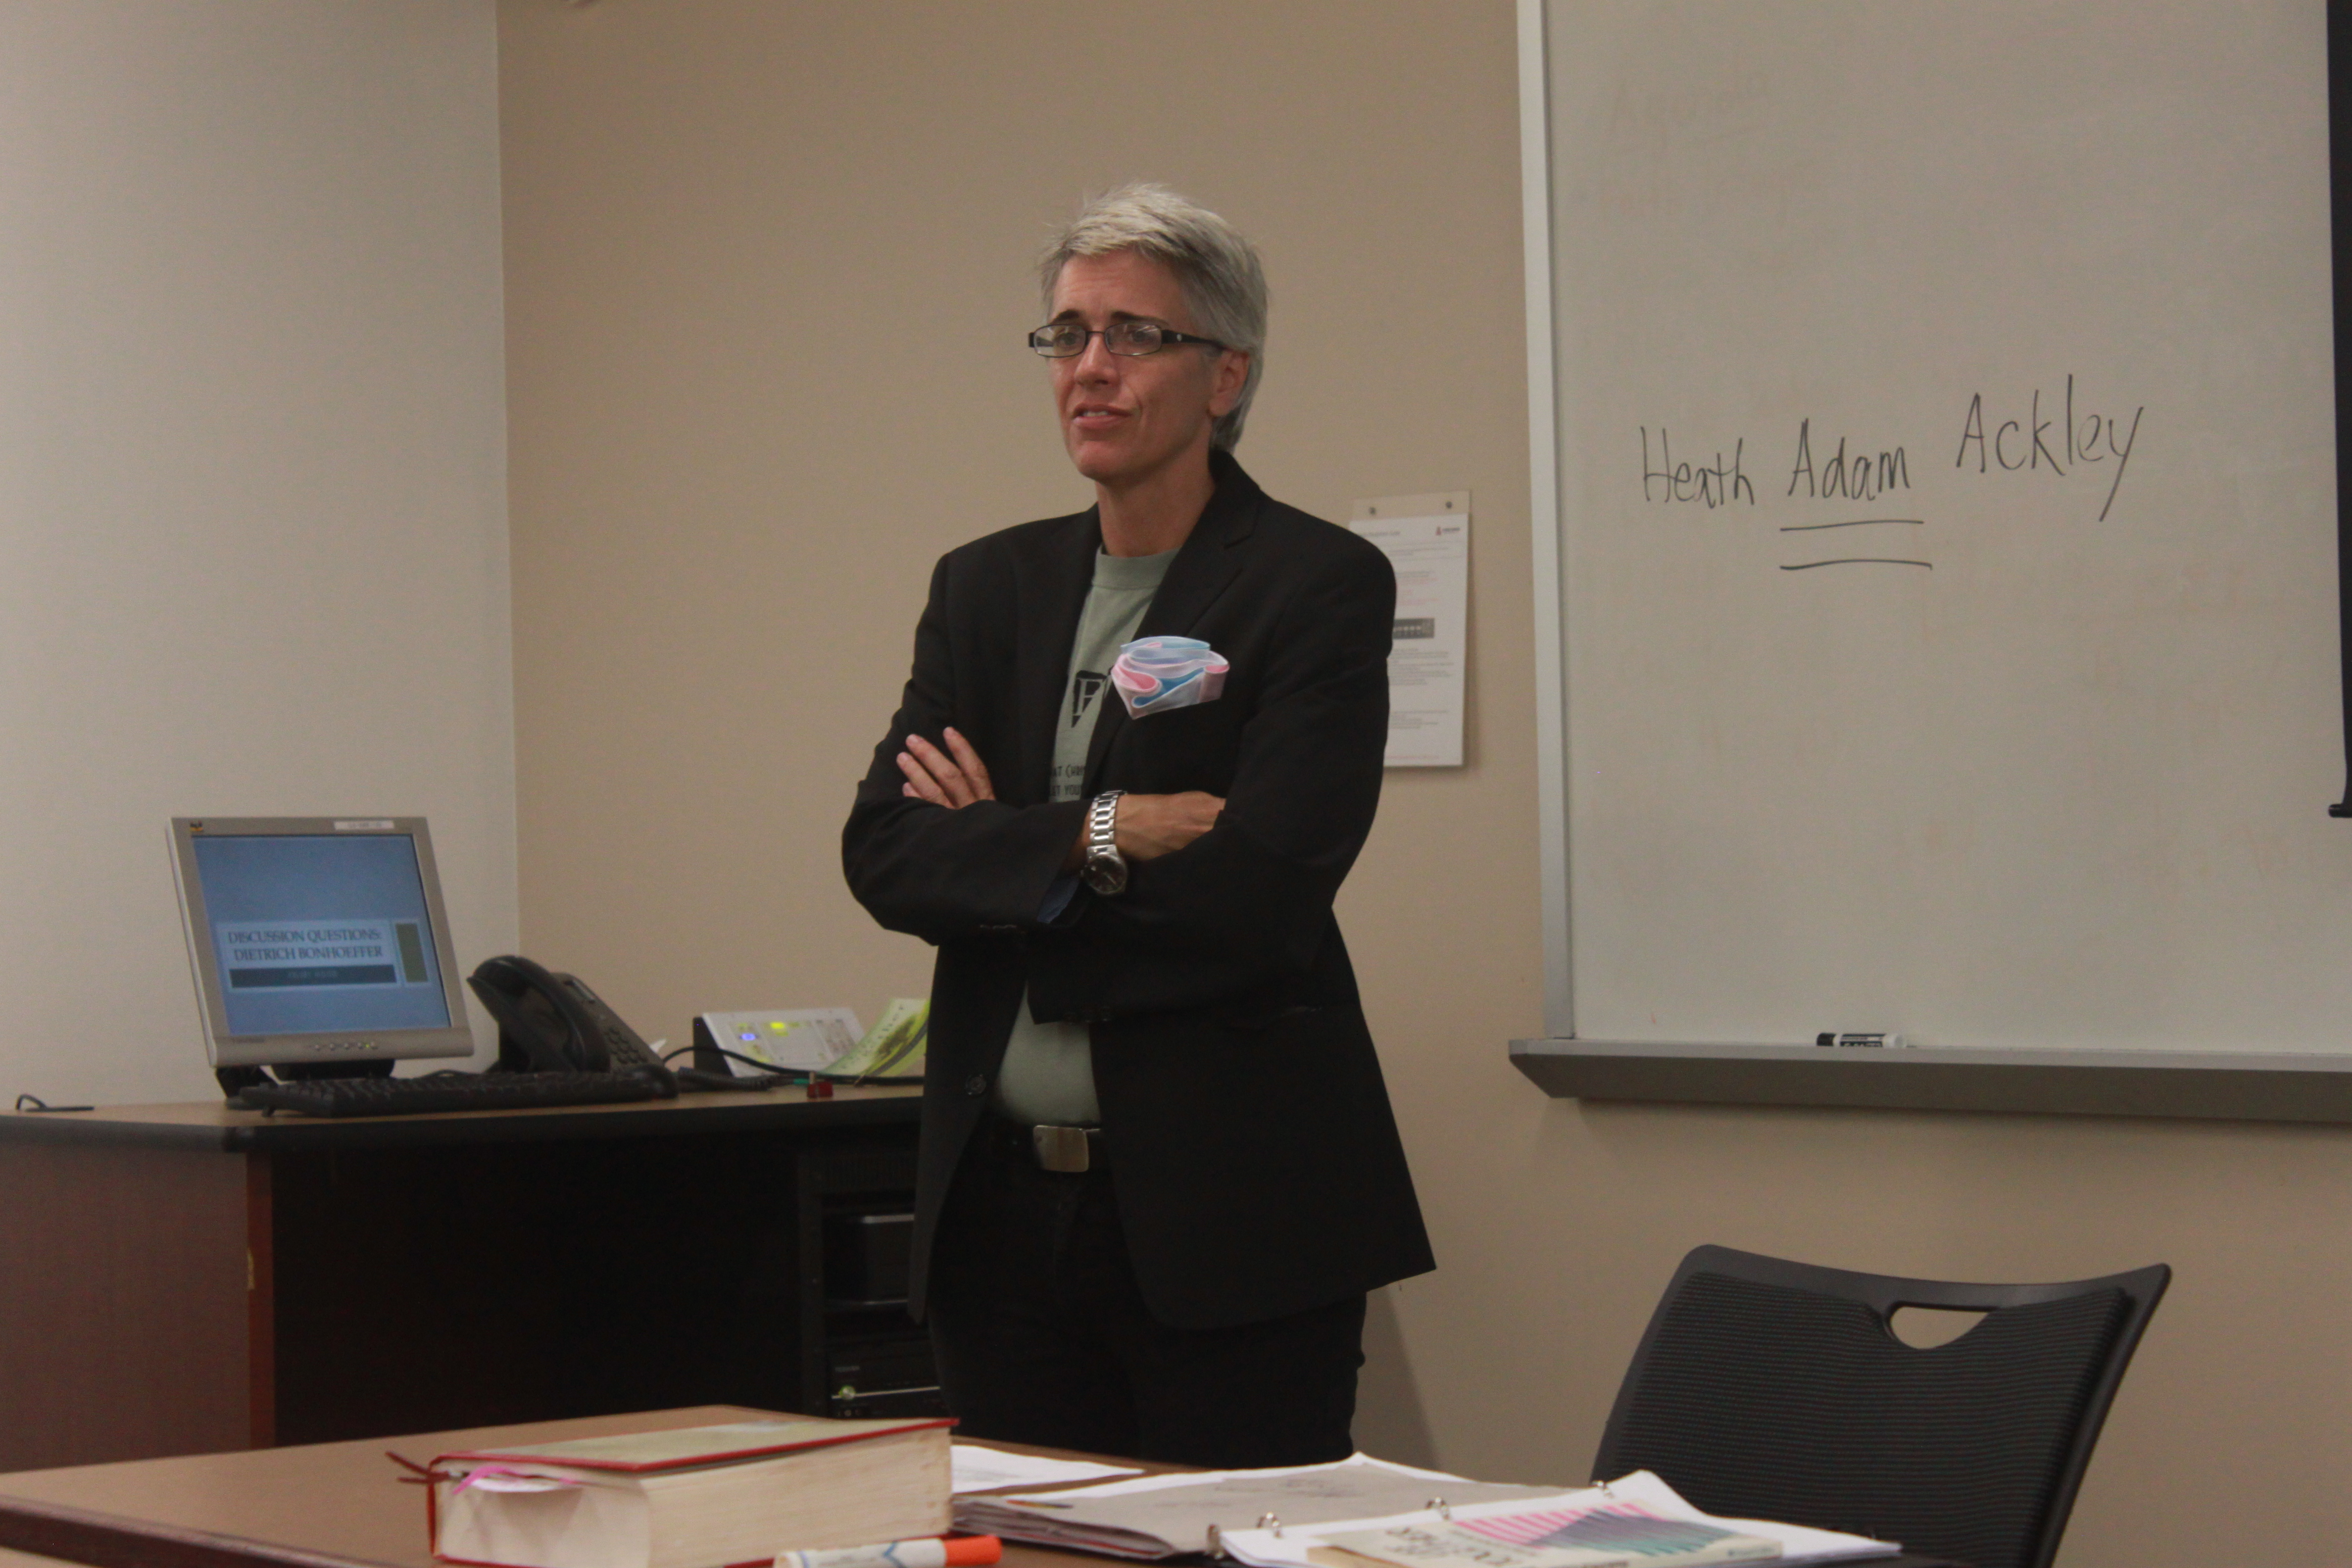 Previously known as Heather Clements, transgender professor Heath Adam Ackley relays the news of his new identity to students in class at the beginning of the fall semester. | Courtesy of Annie Z. Yu of The Clause